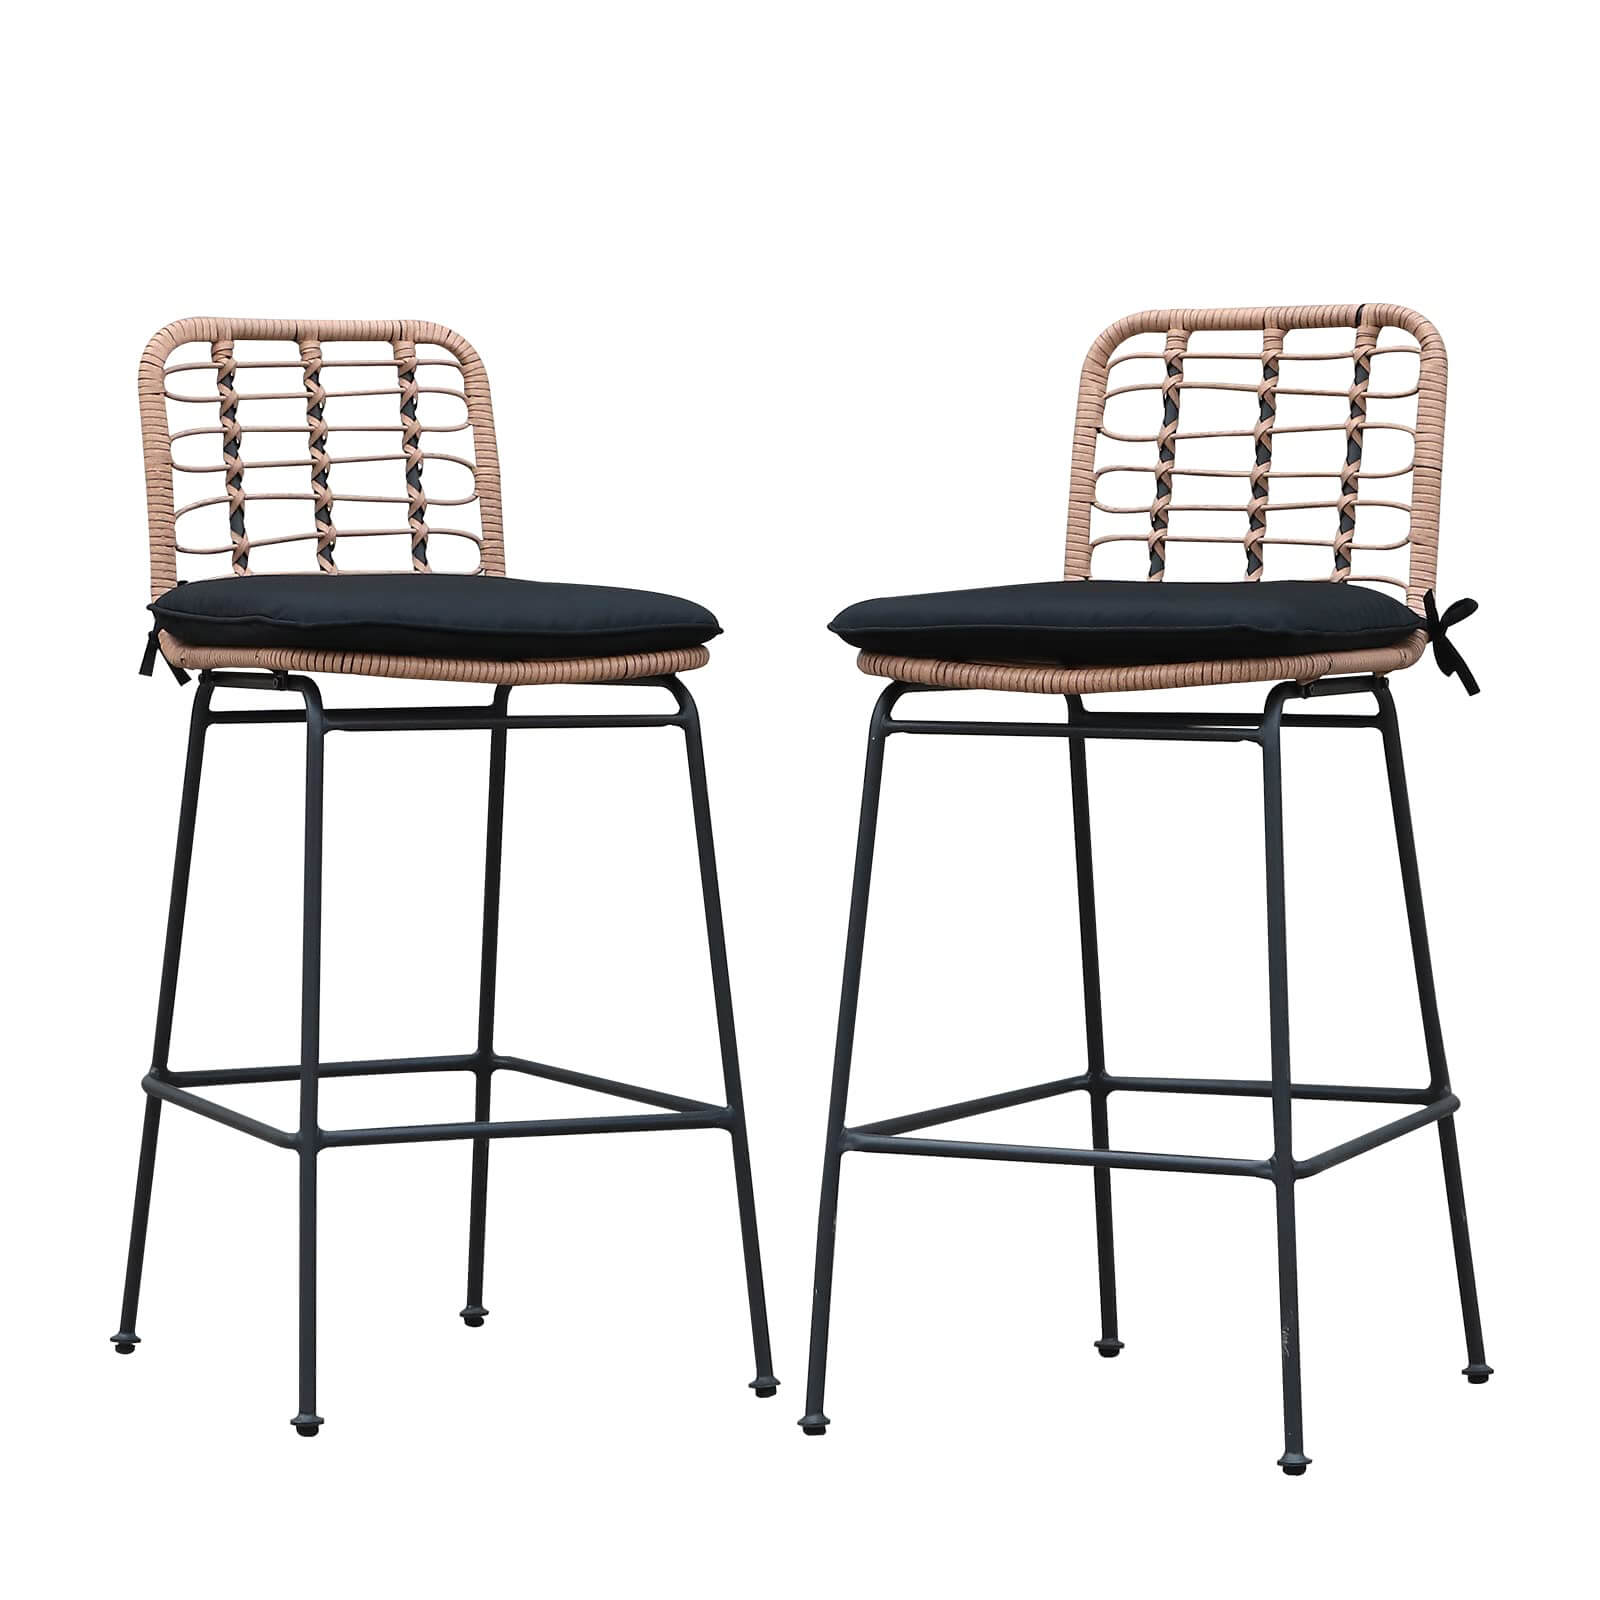 2-4 pcs Outdoor Bar Stools Set, Wicker Dining Chairs with Footrest | Orange-Casual